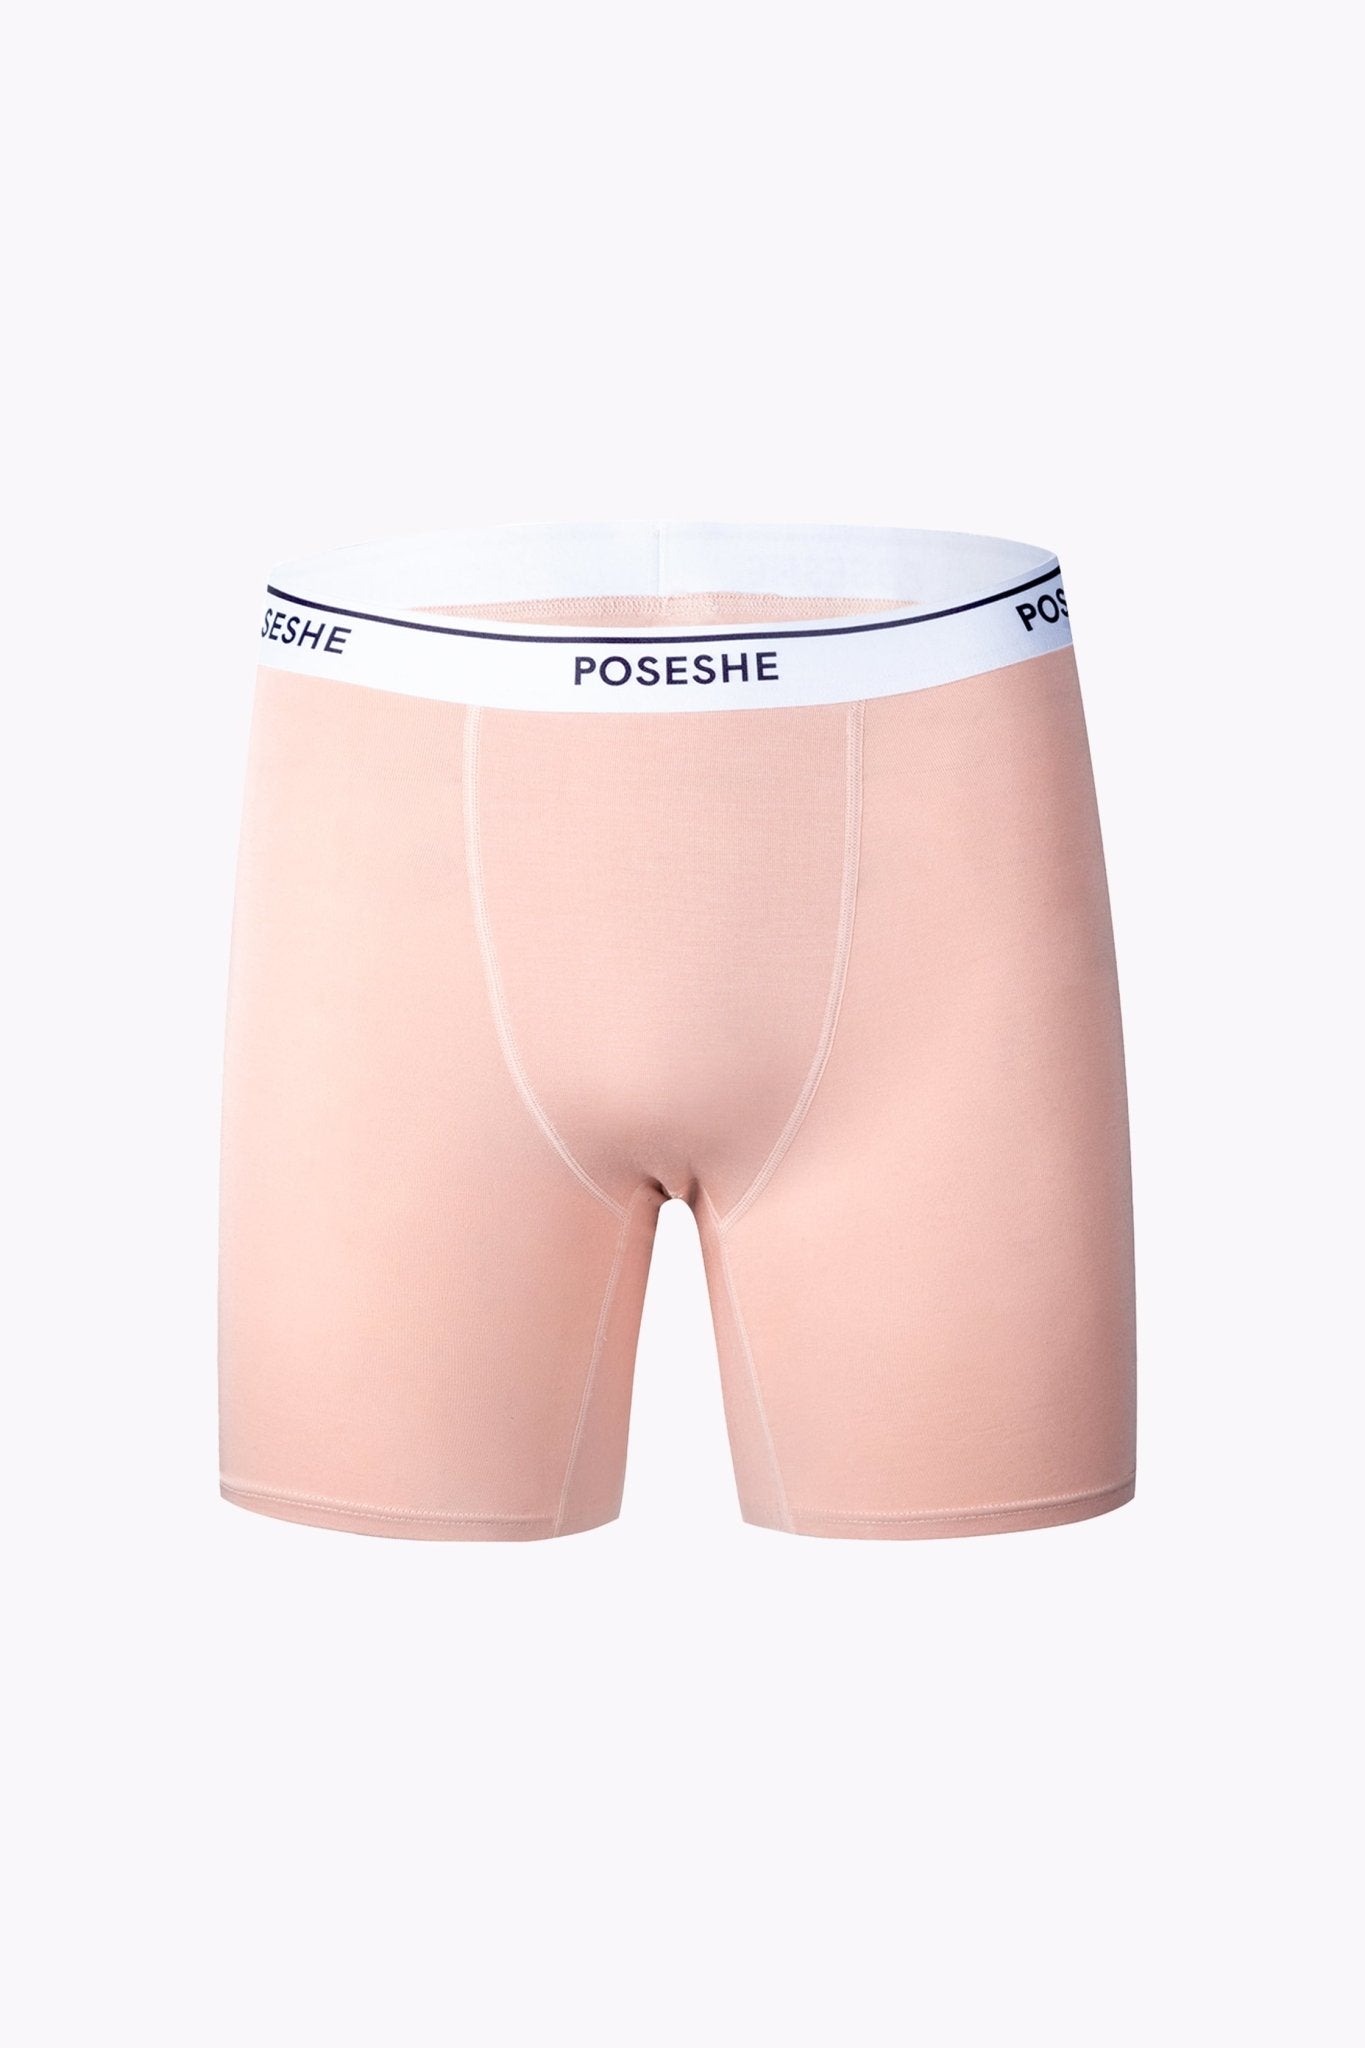 Body Liberator High-Waisted Boxer Briefs (Period Friendly) - POSESHE